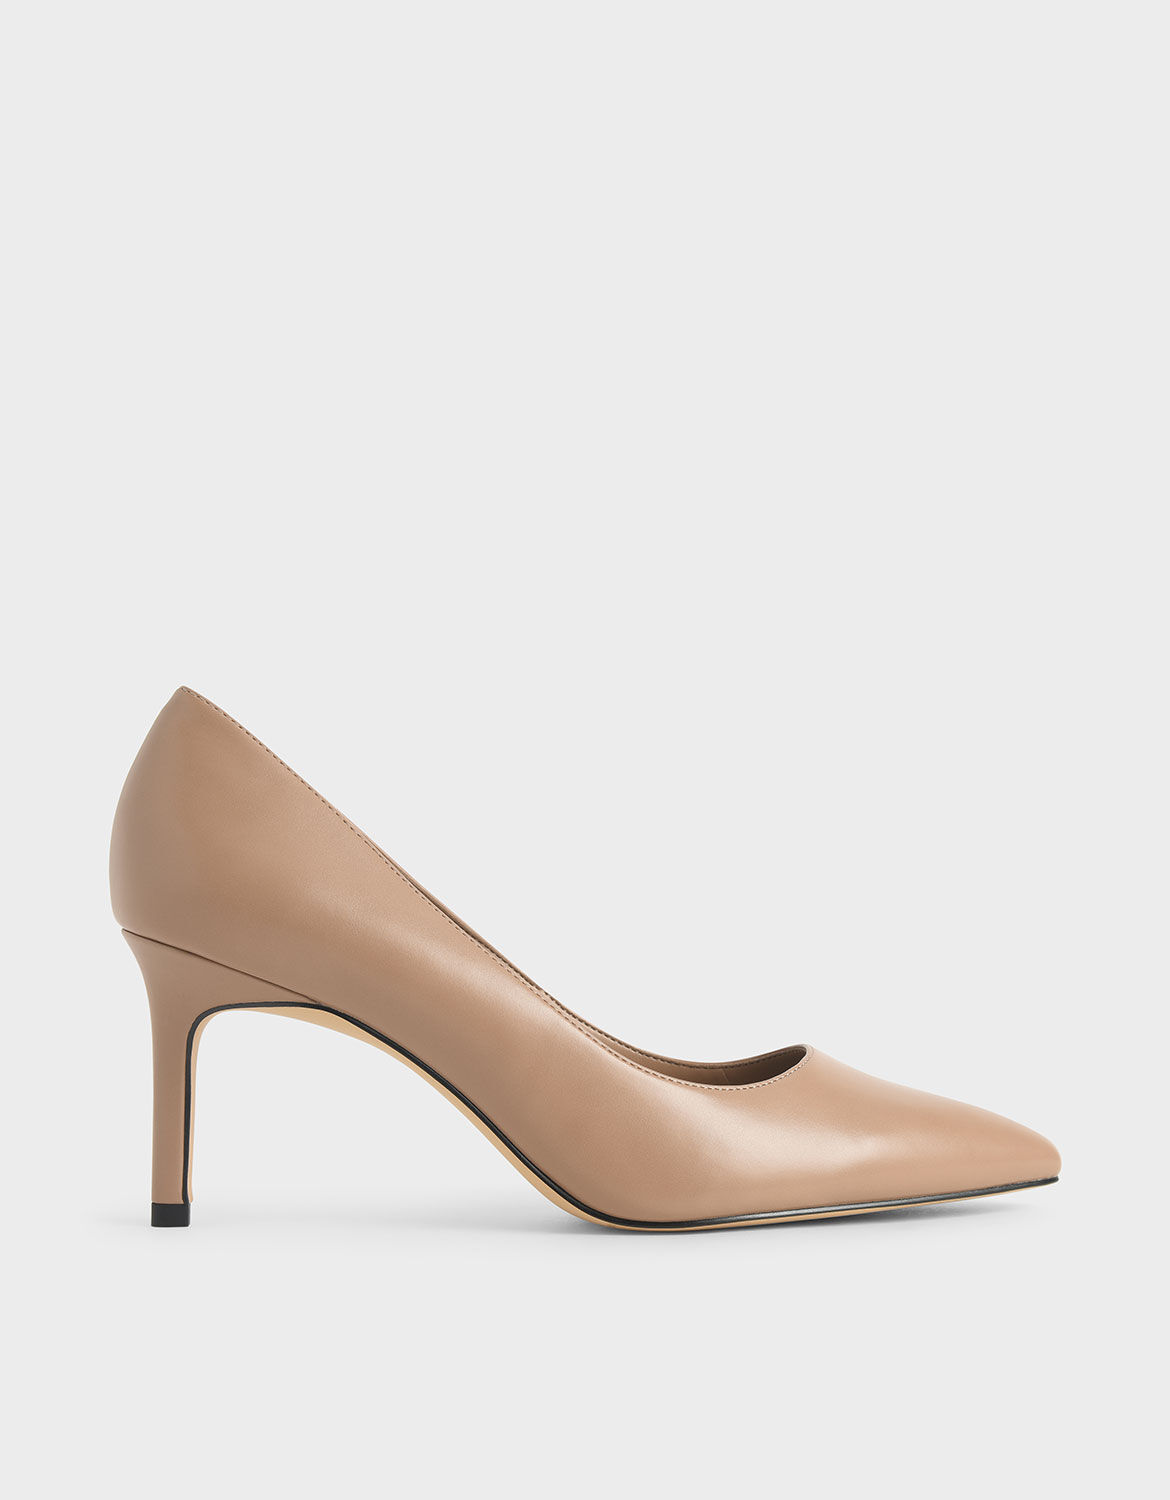 Charles & Keith Women's Pointed-Toe Stiletto Heel Ankle